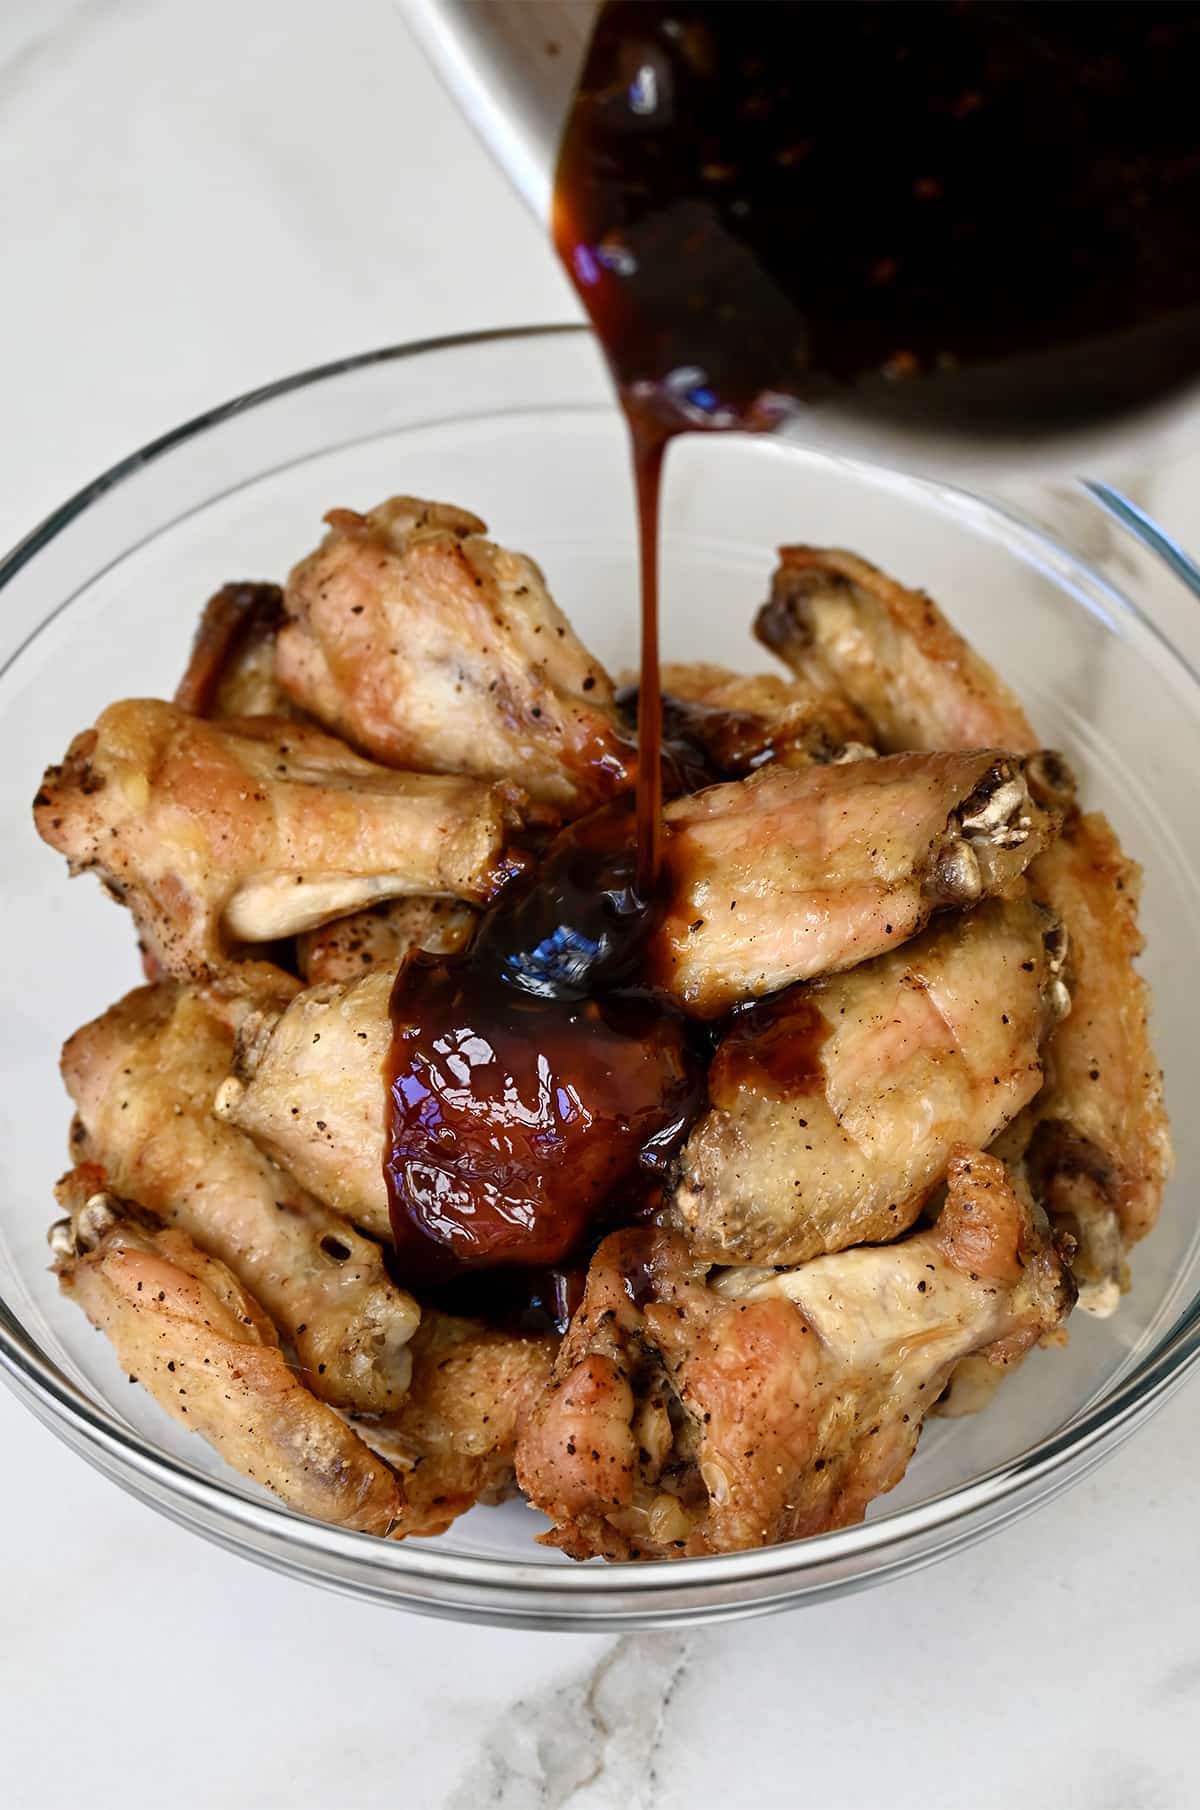 Teriyaki glaze being poured from a saucepan over baked chicken wings in a glass bowl.